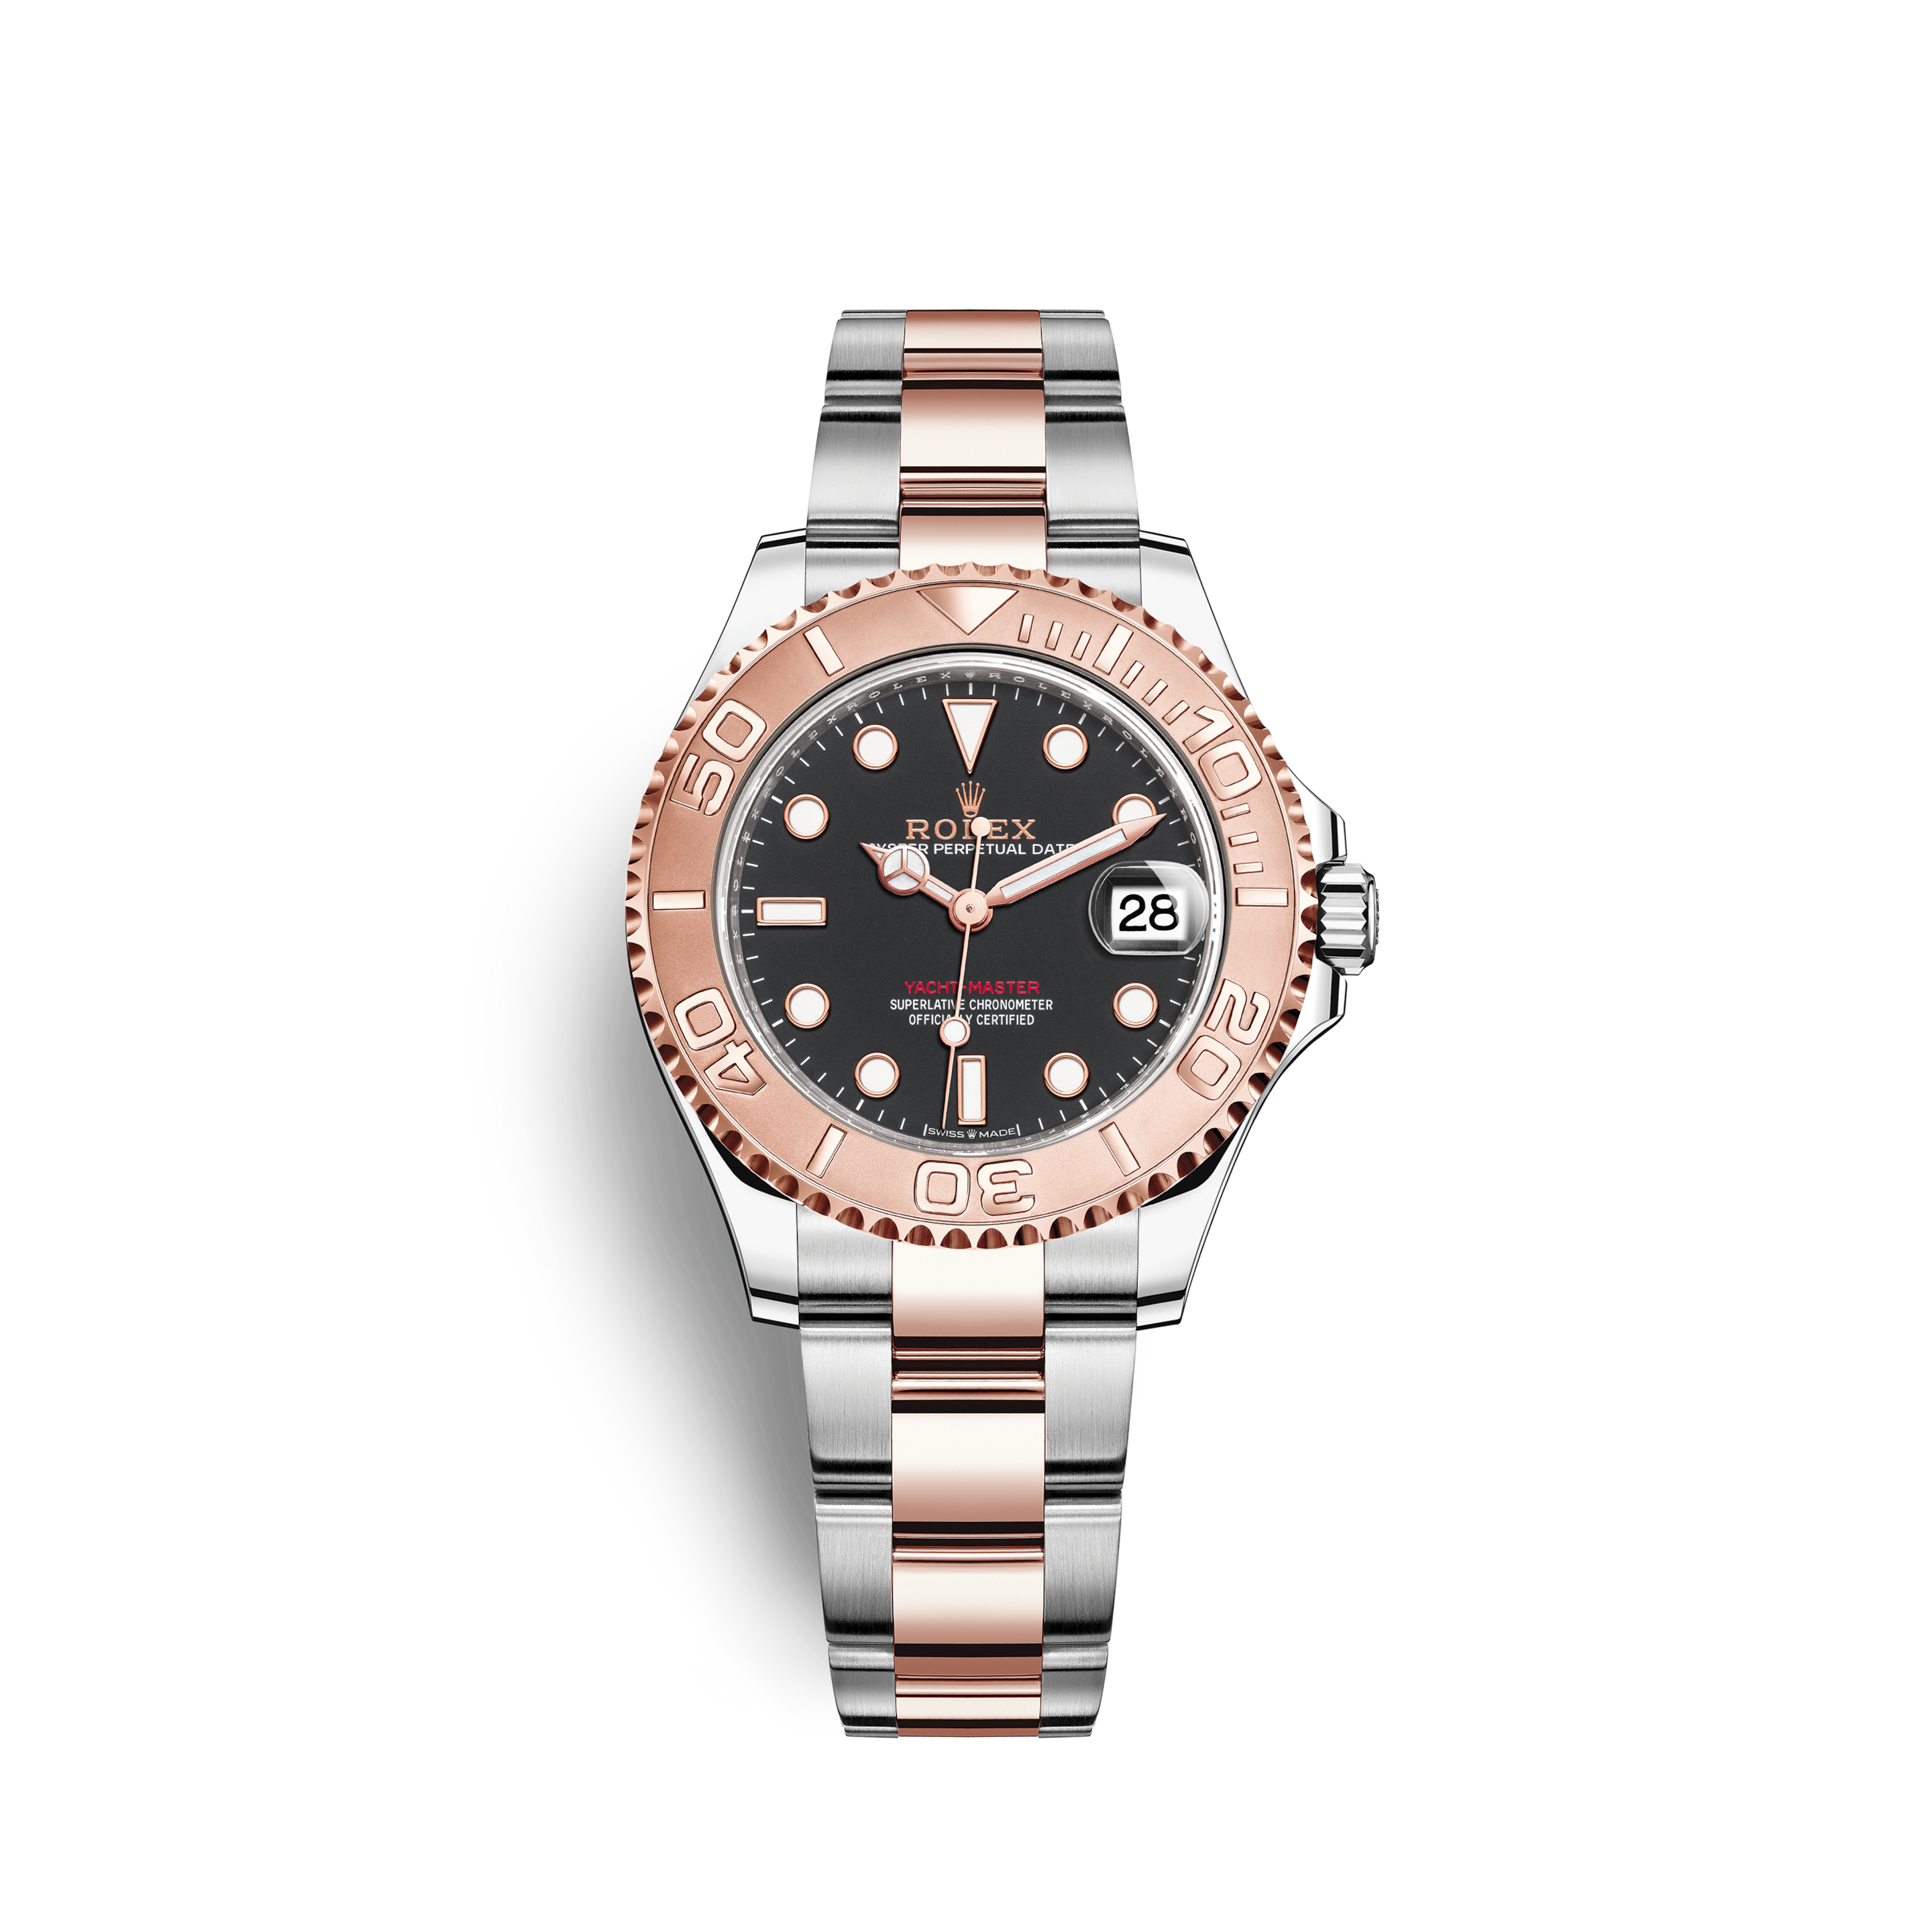 Rolex Yacht-Master - The Watch of the 